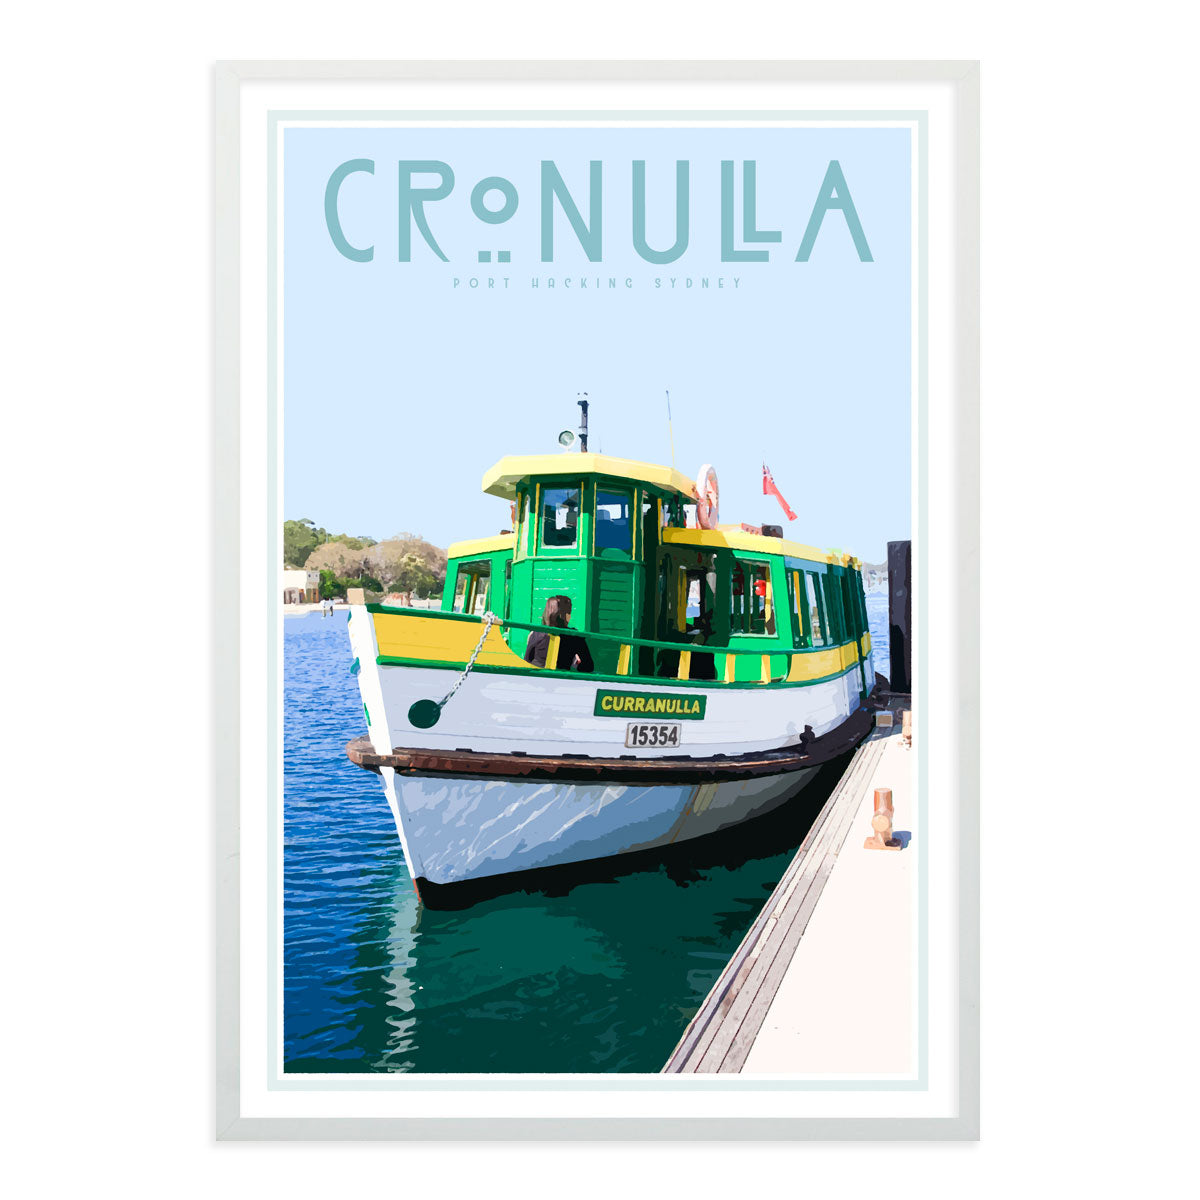 Cronulla ferry vintage style travel print, white frame, designed by places we luv